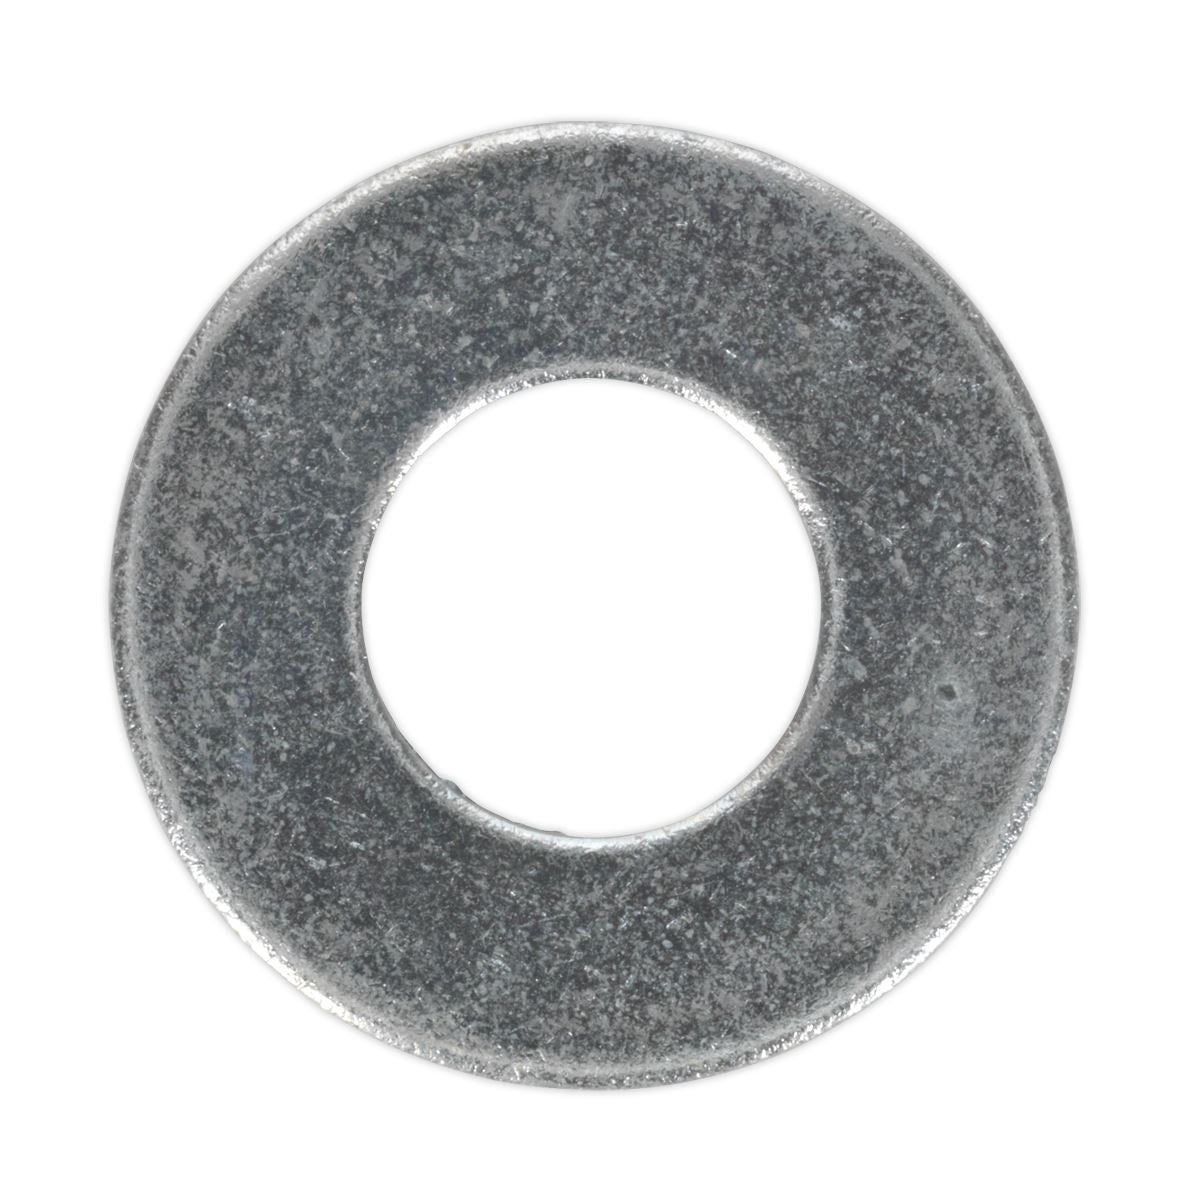 Sealey Flat Washer M12 x 28mm Form C Pack of 100